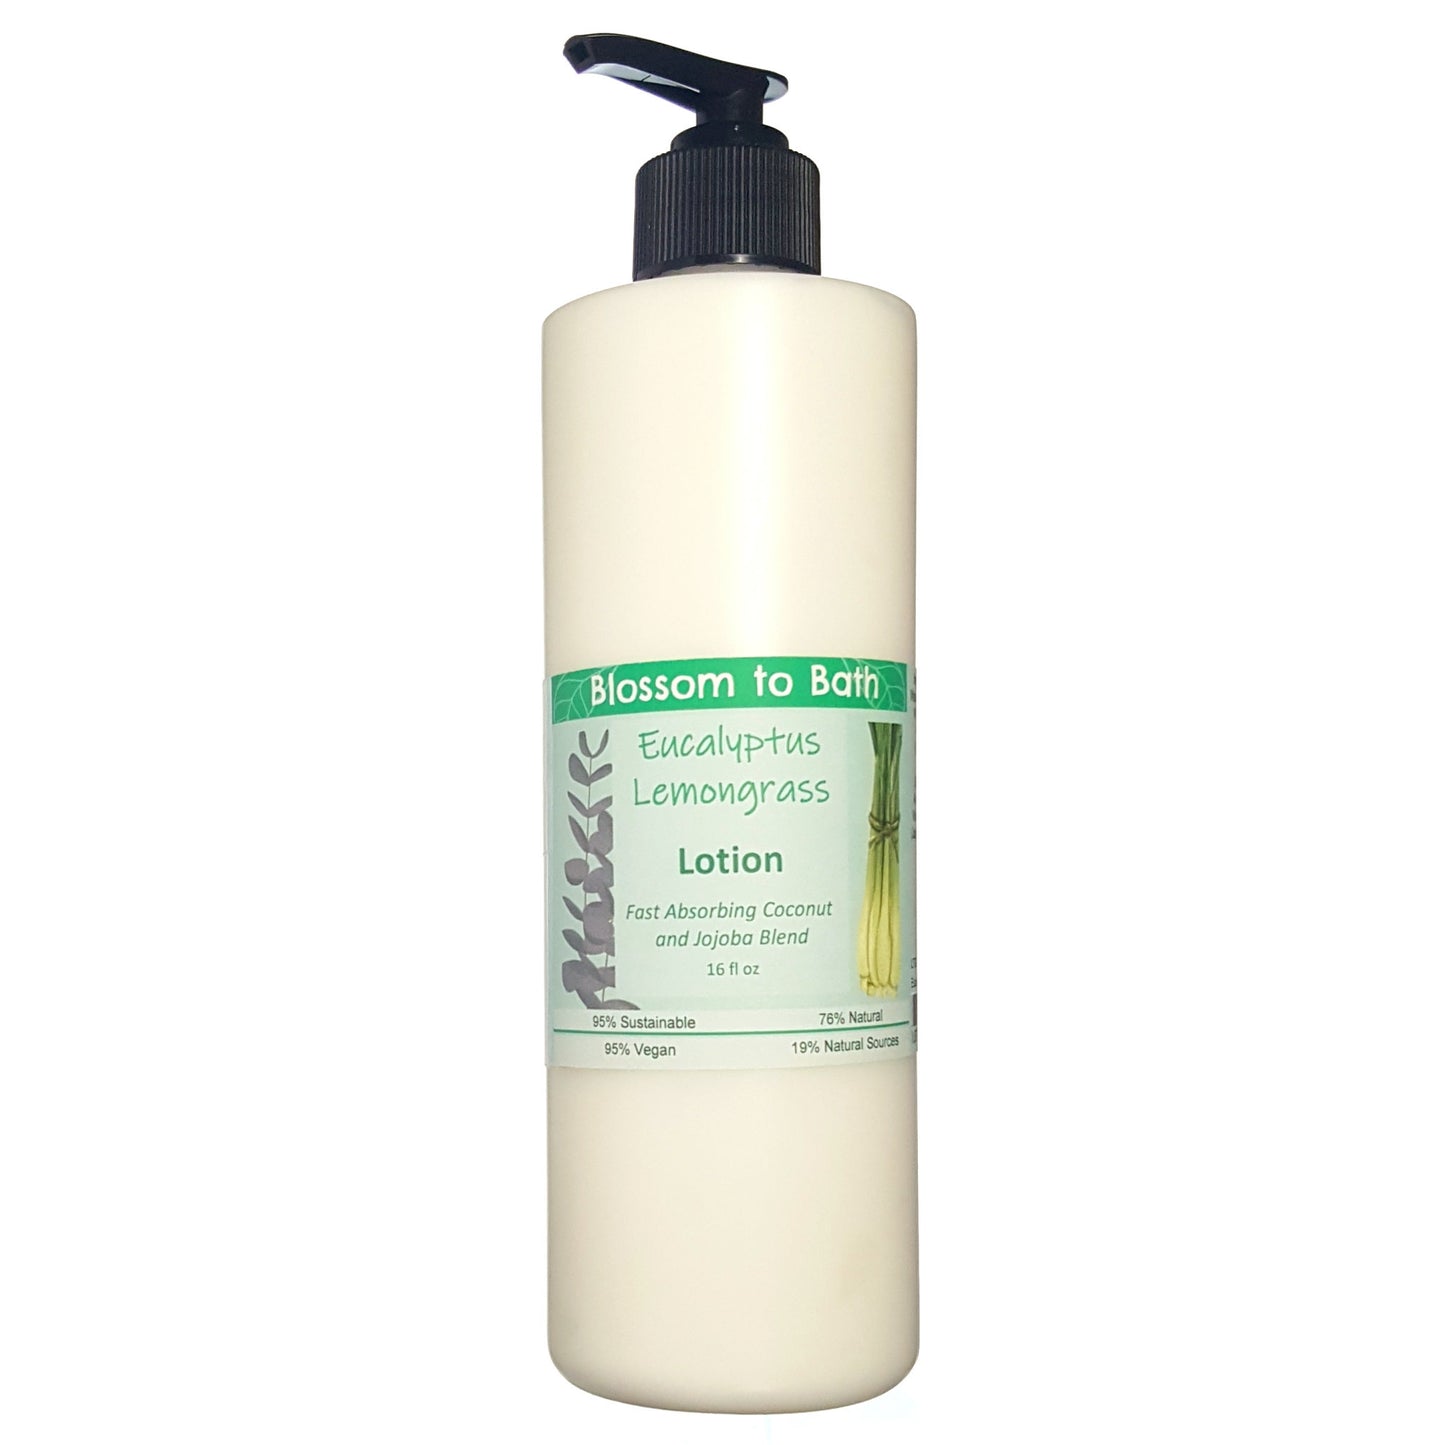 Buy Blossom to Bath Eucalyptus Lemongrass Lotion from Flowersong Soap Studio.  Daily moisture luxury that soaks in quickly made with organic oils and butters that soften and smooth the skin  Fresh, sweet herbally clean scent of lemongrass and bracing Eucalyptus.